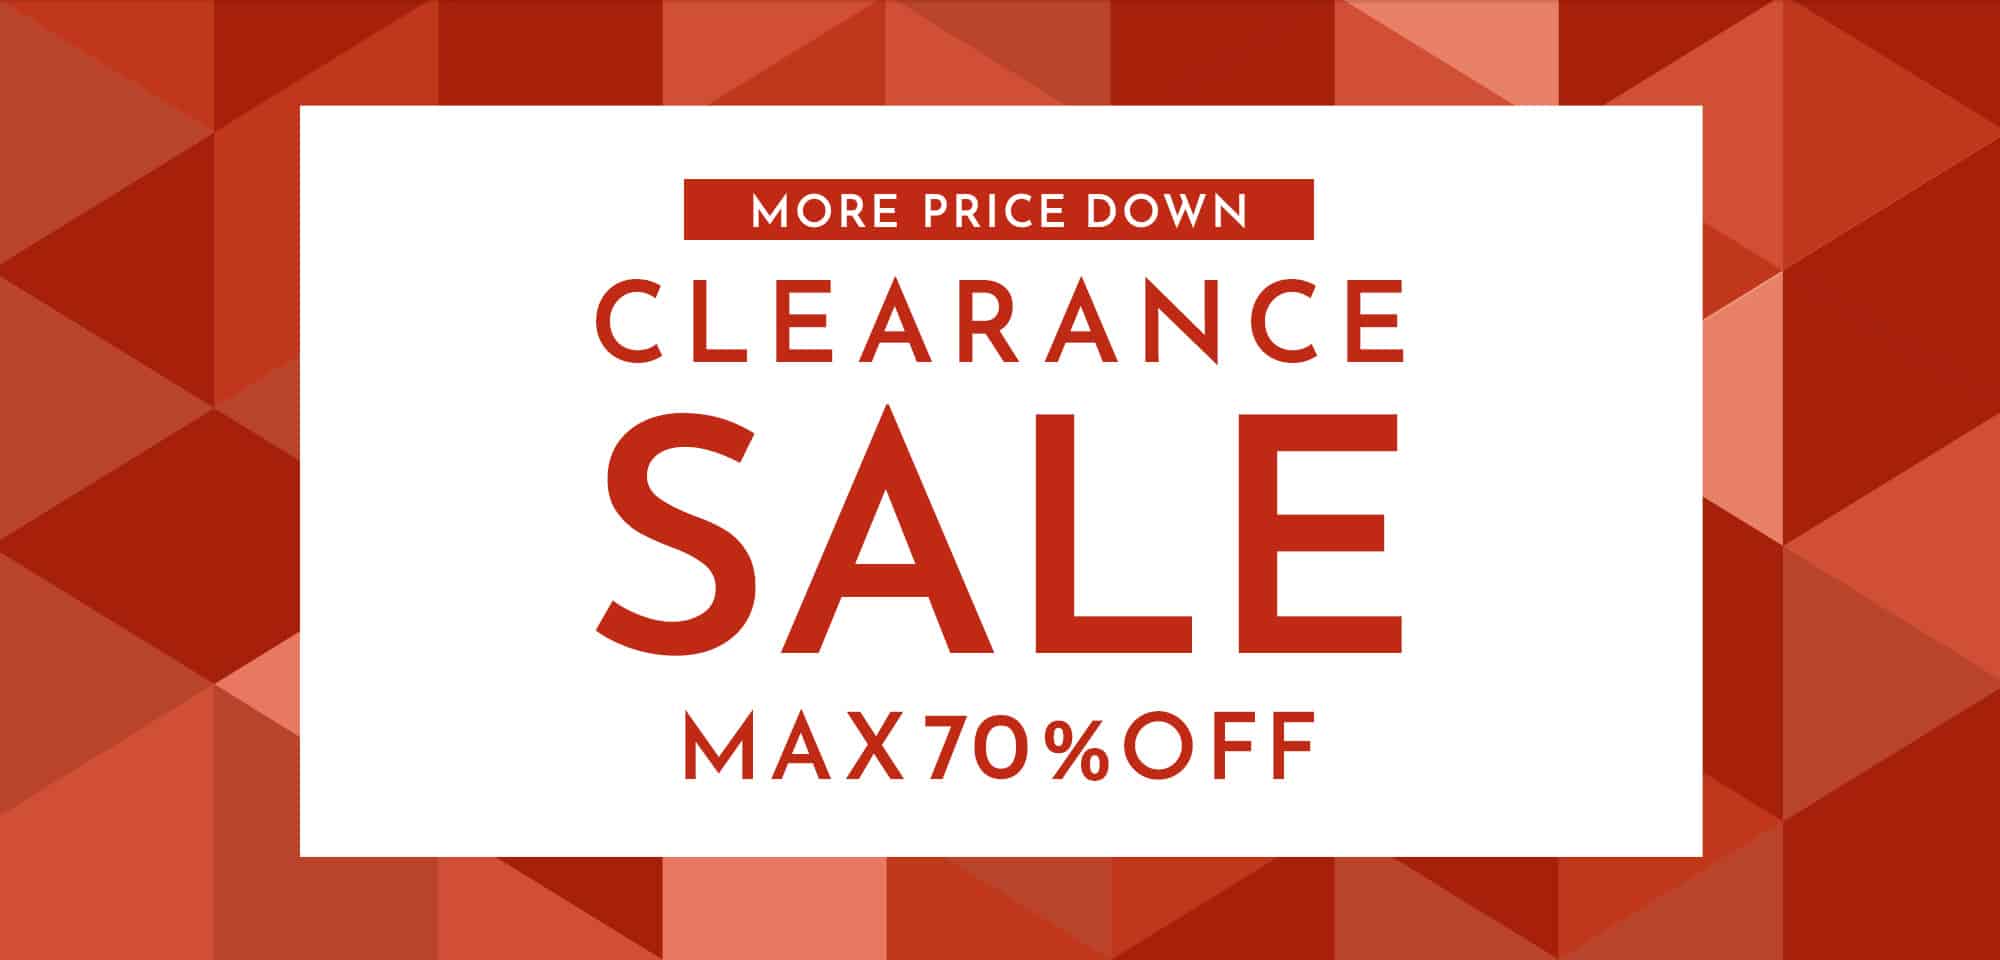 CLEARANCE SALE MAX70%OFF